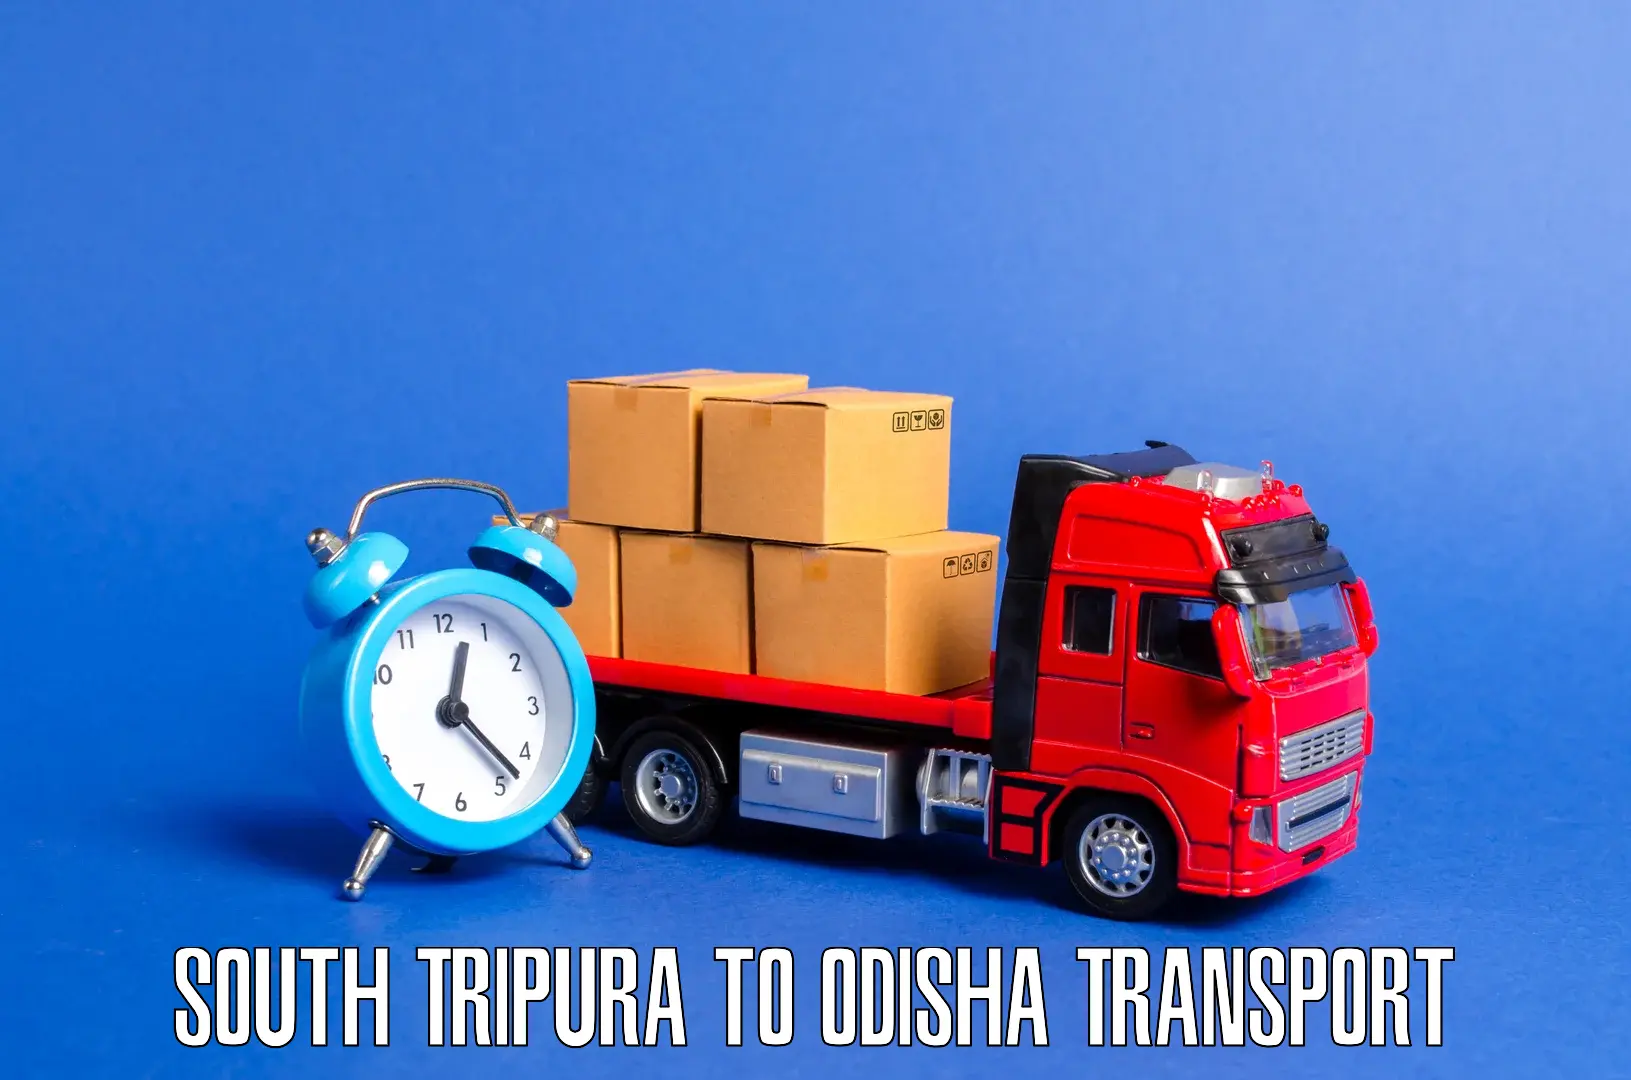 Transport shared services South Tripura to Ghatgaon